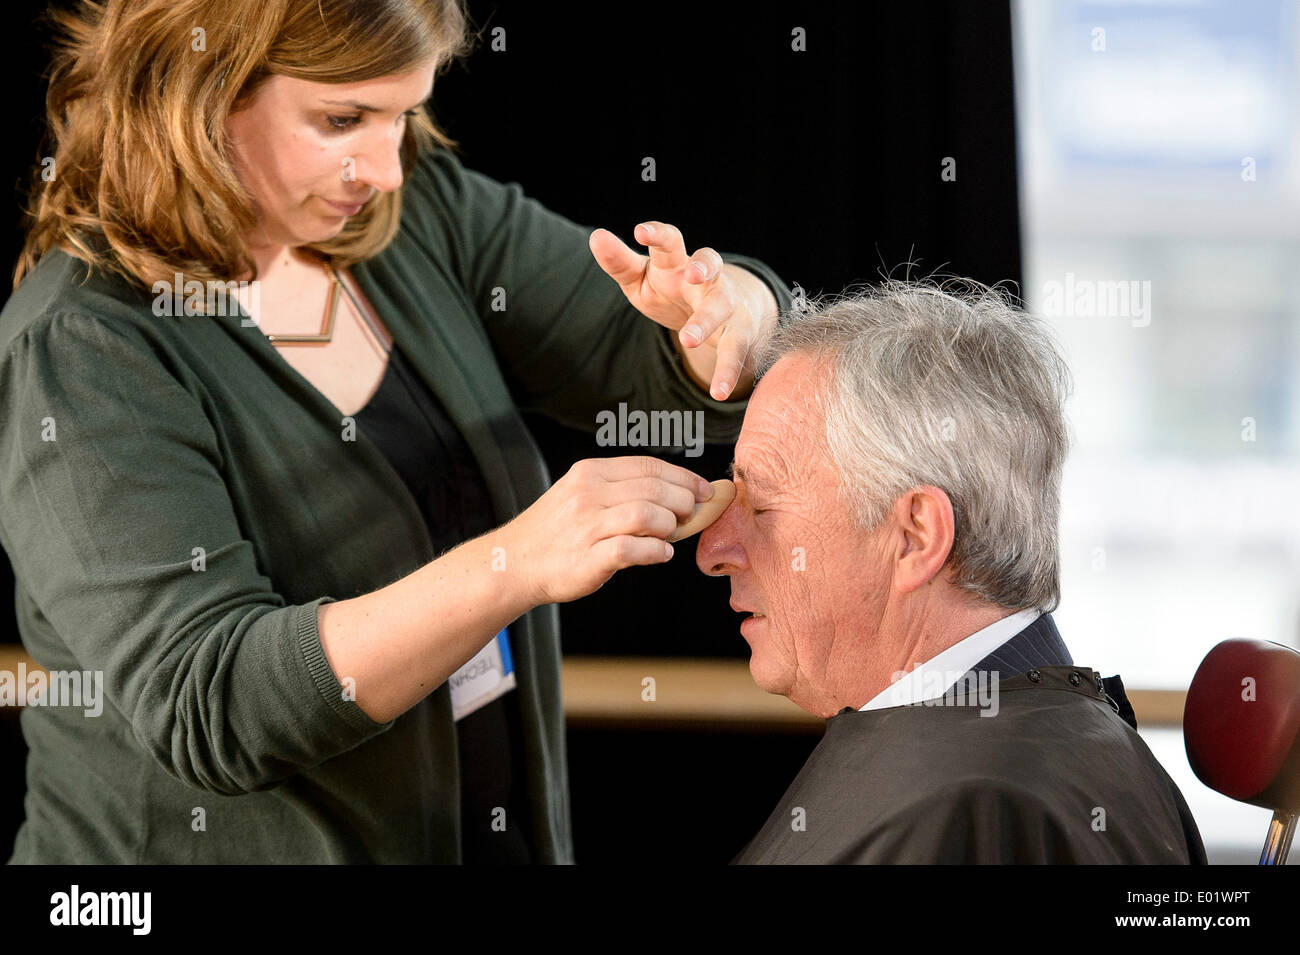 Brussels, Belgium. 29th April 2014. Jean-Claude Juncker, top candidate for European People's Party (EPP) receives the make-up ahead of Euranet's 'Big Crunch' Presidential debate at the EU parliament in BrusselsThe four top candidates for the presidency of the European Commission - Jean-Claude Juncker, Ska Keller, Martin Schulz and Guy Verhofstadt - attend EU-wide debate organized by EuranetPlus and focused on the major election topics. Credit:  dpa picture alliance/Alamy Live News Stock Photo